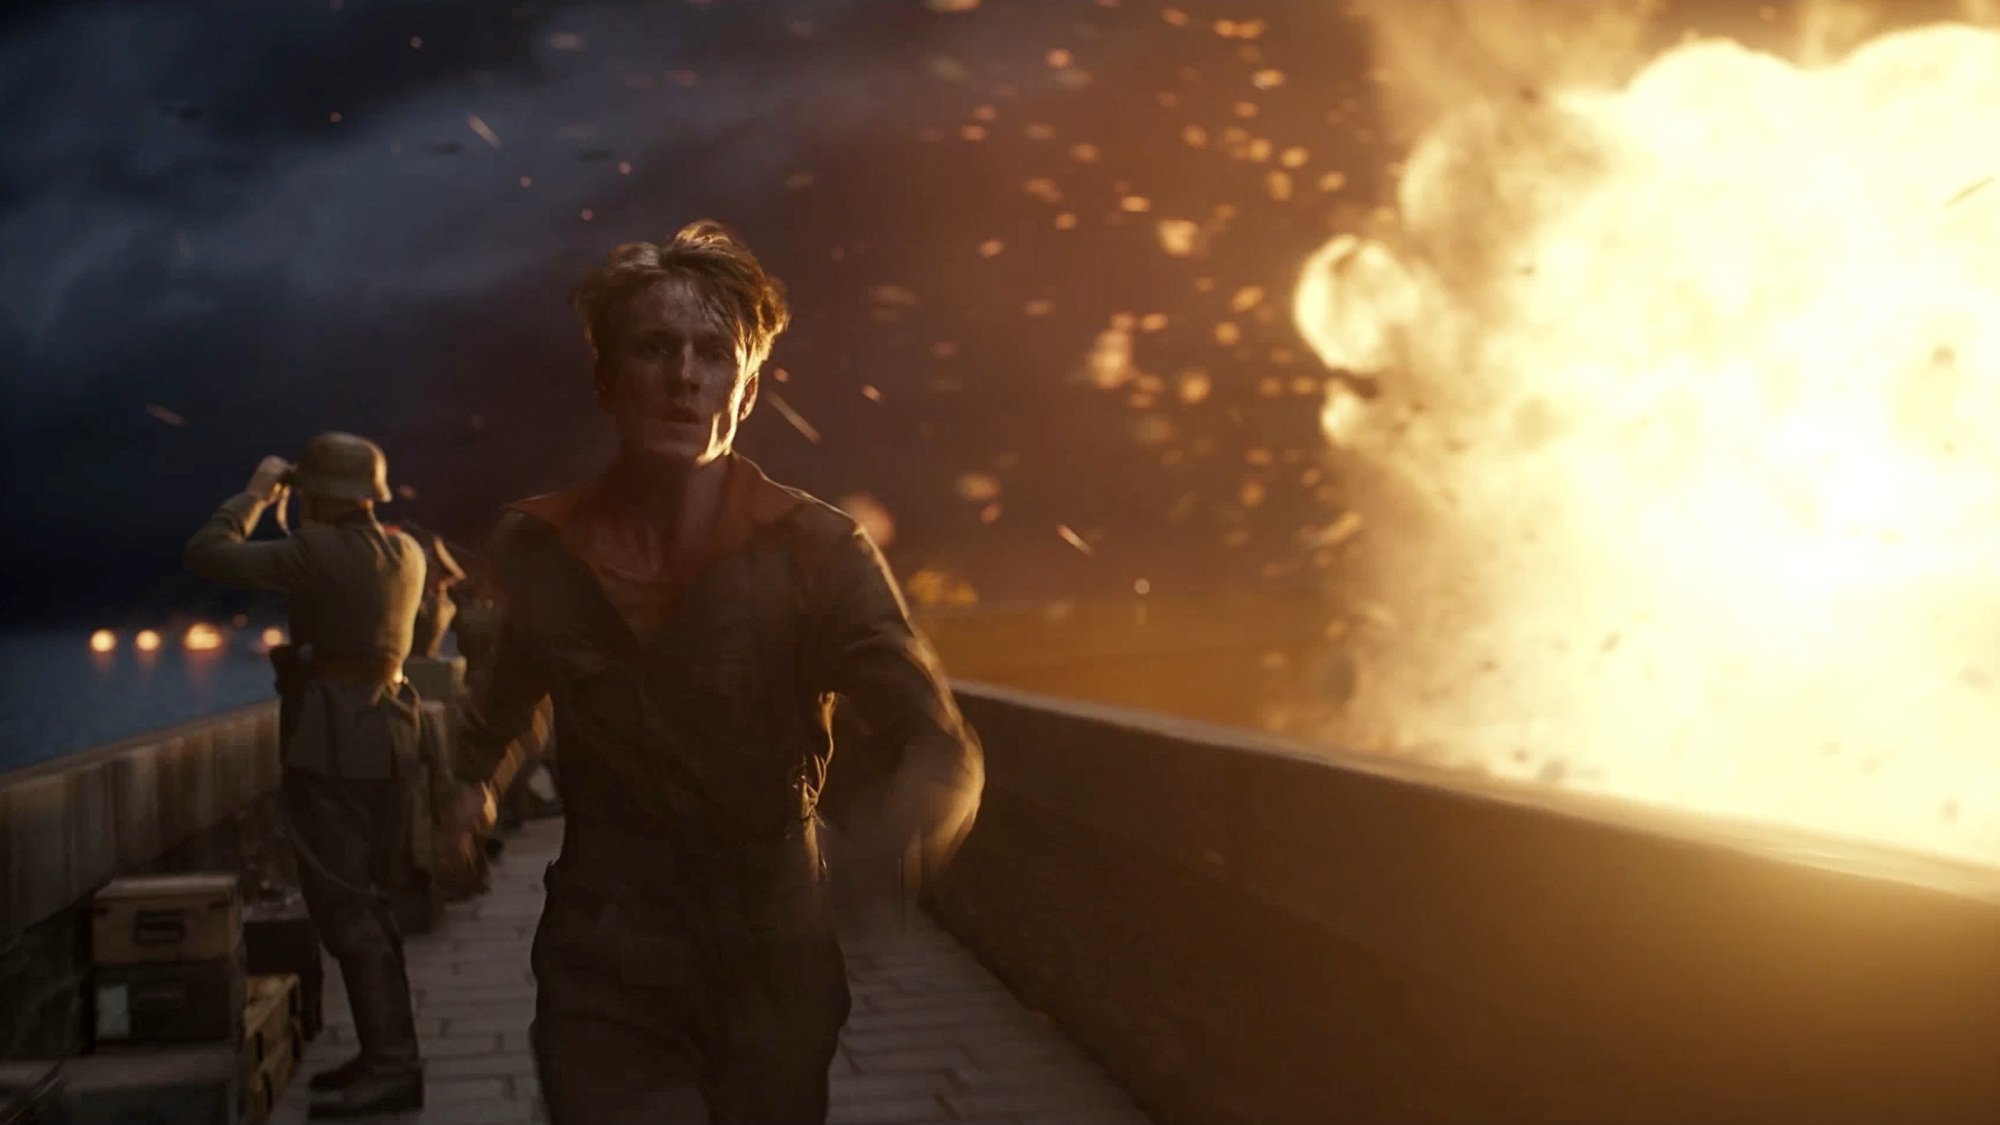 A young man in a soldier's uniform runs along a wall as an explosion occurs nearby.